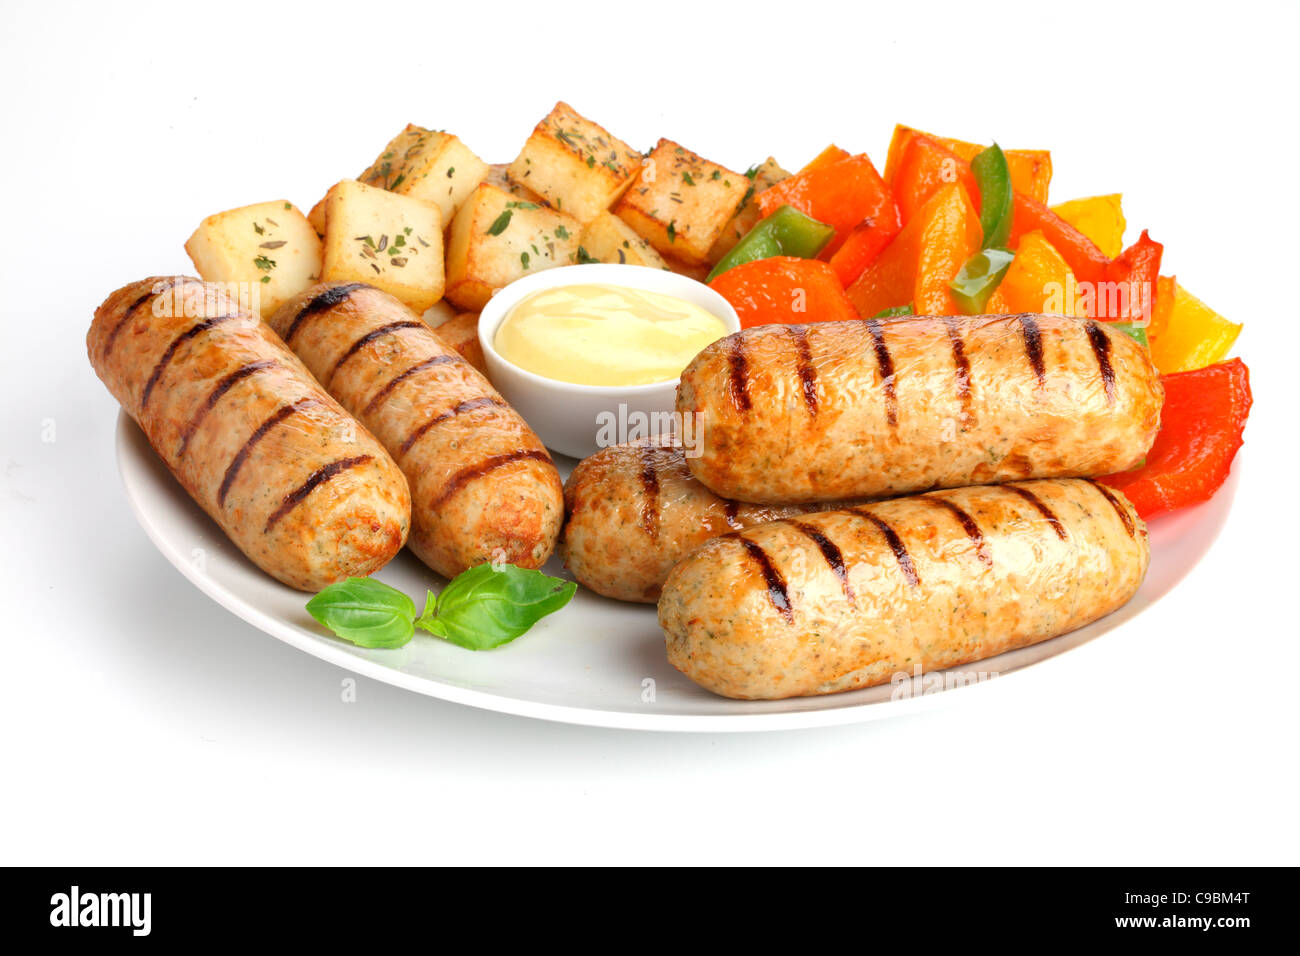 CHICKEN SAUSAGES WITH SAUTE POTATOES Stock Photo